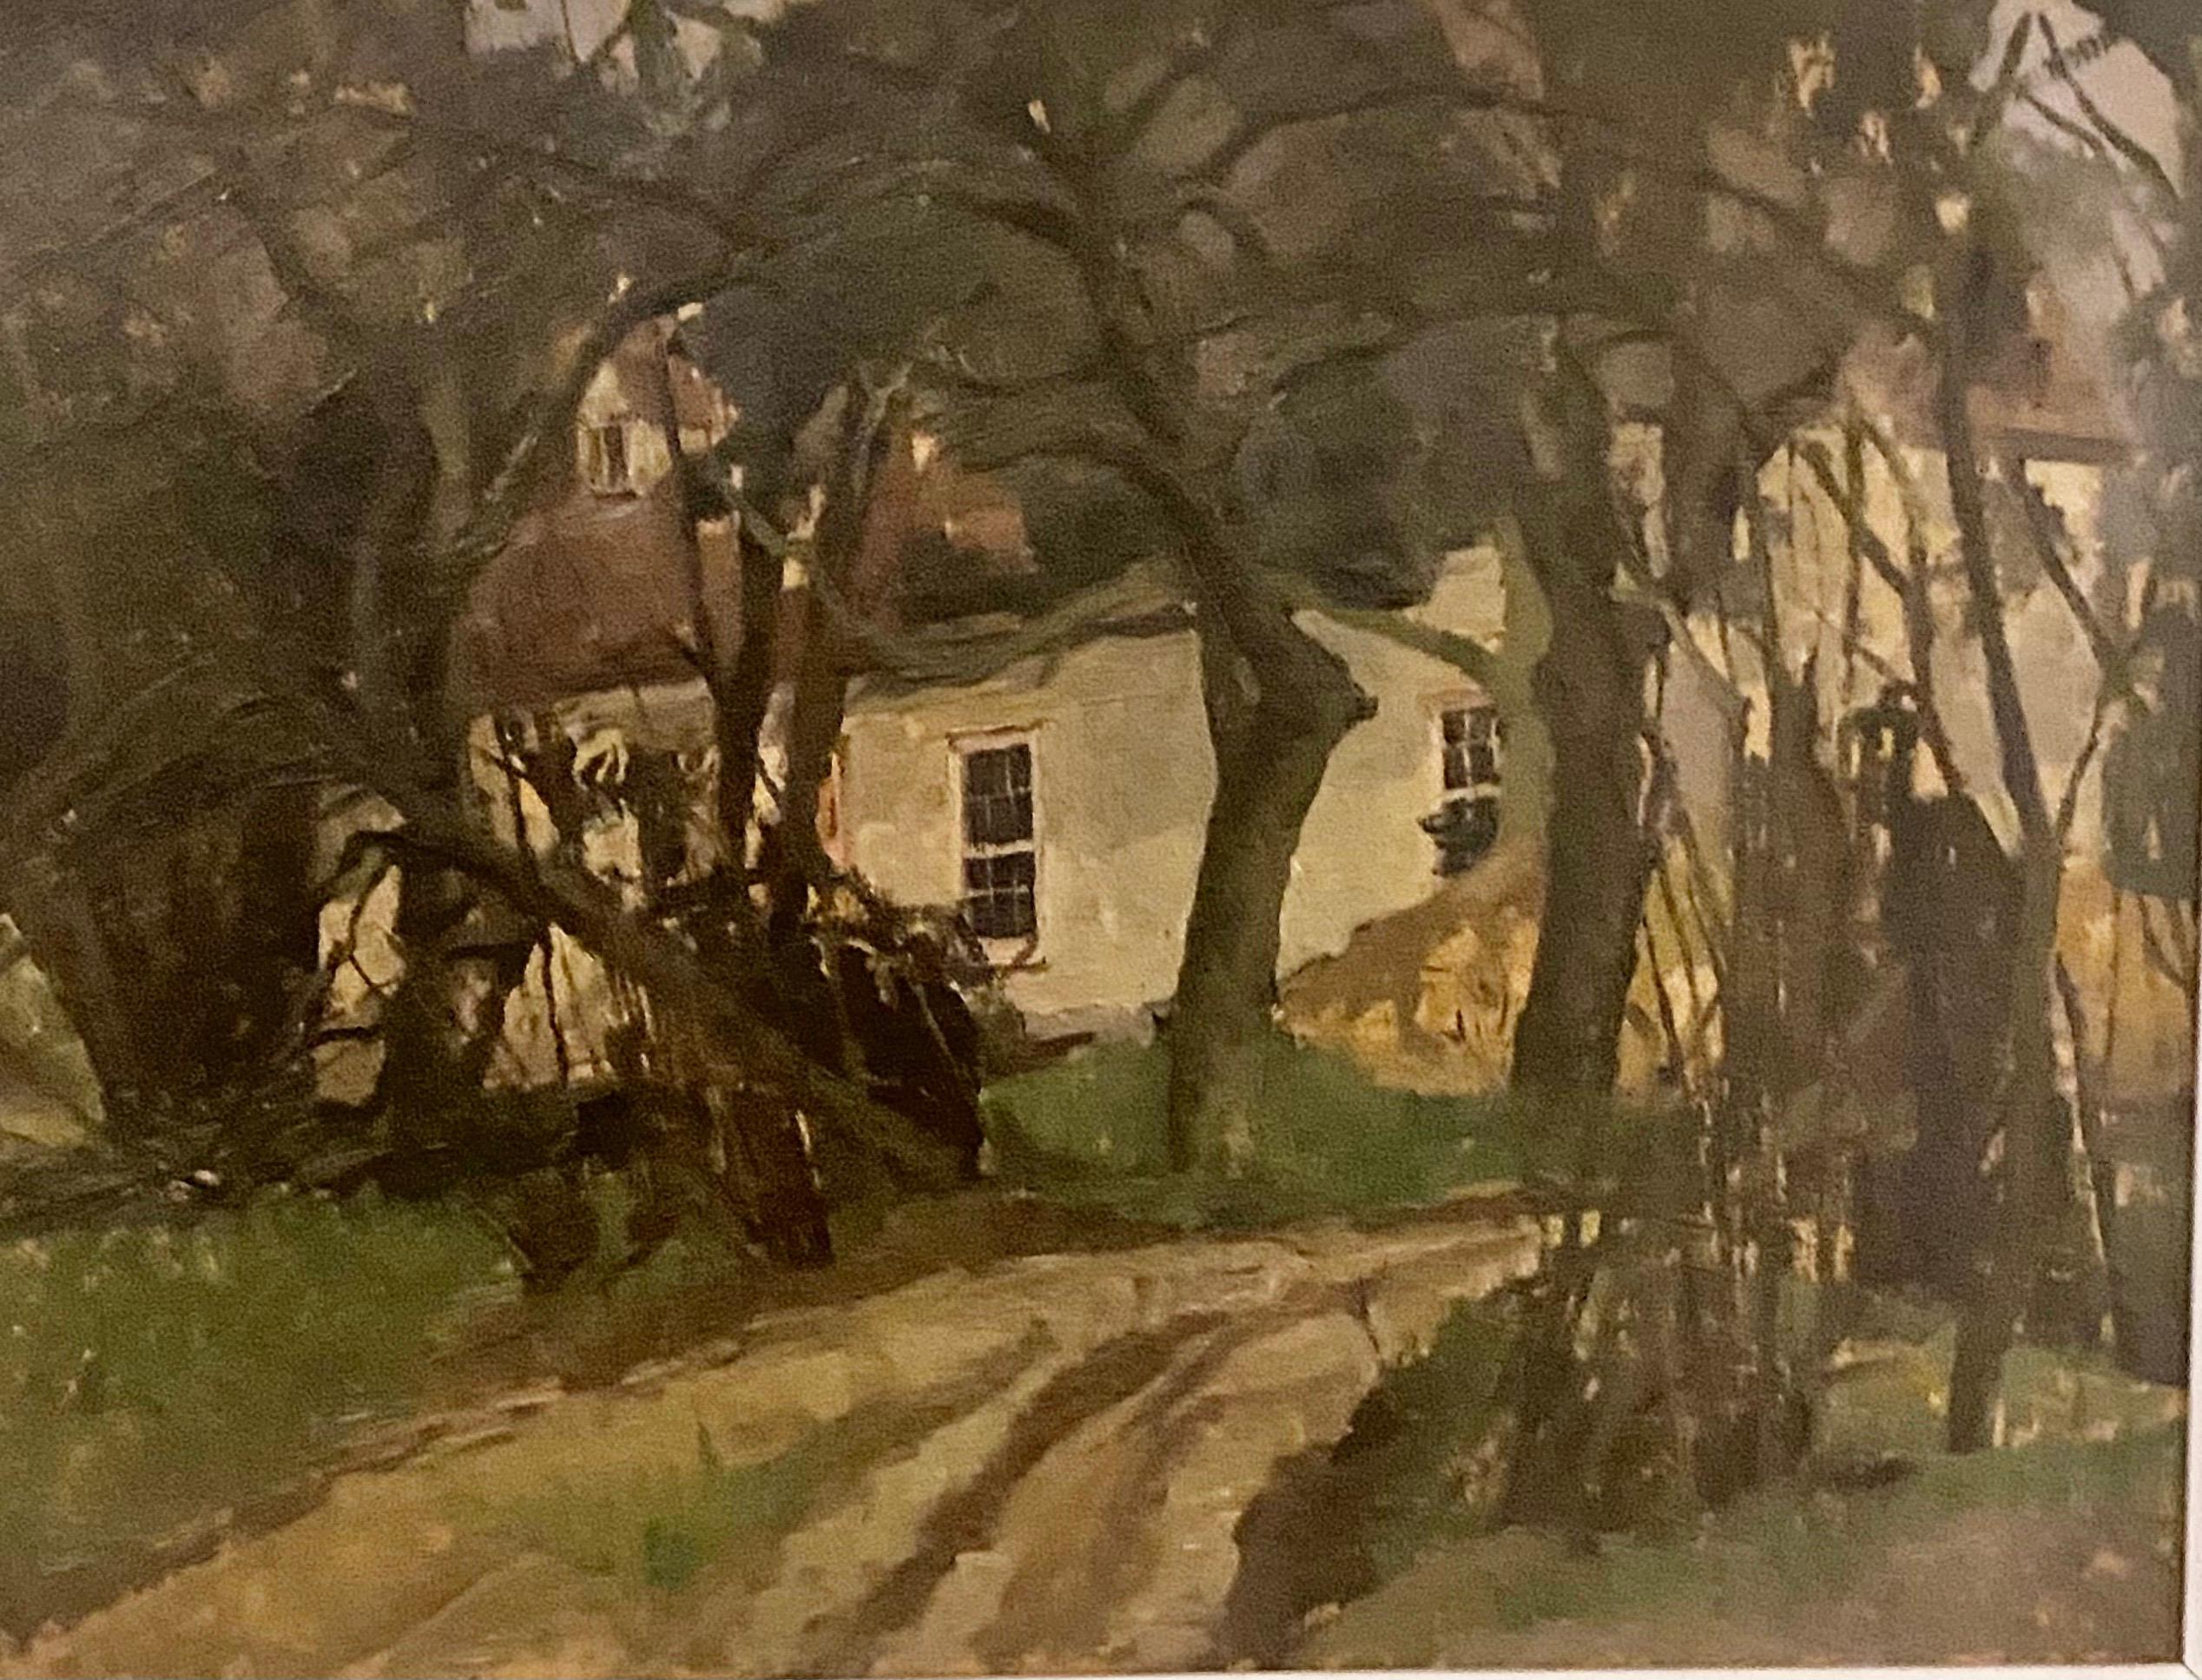 Painted by the noted British Post Impressionist artist Peter Greenham, this fine oil on canvas depicts the The House in the woods.. Oil on board.
Peter Greenham was a distinguished figurative painter of portraits, landscapes and incidents from